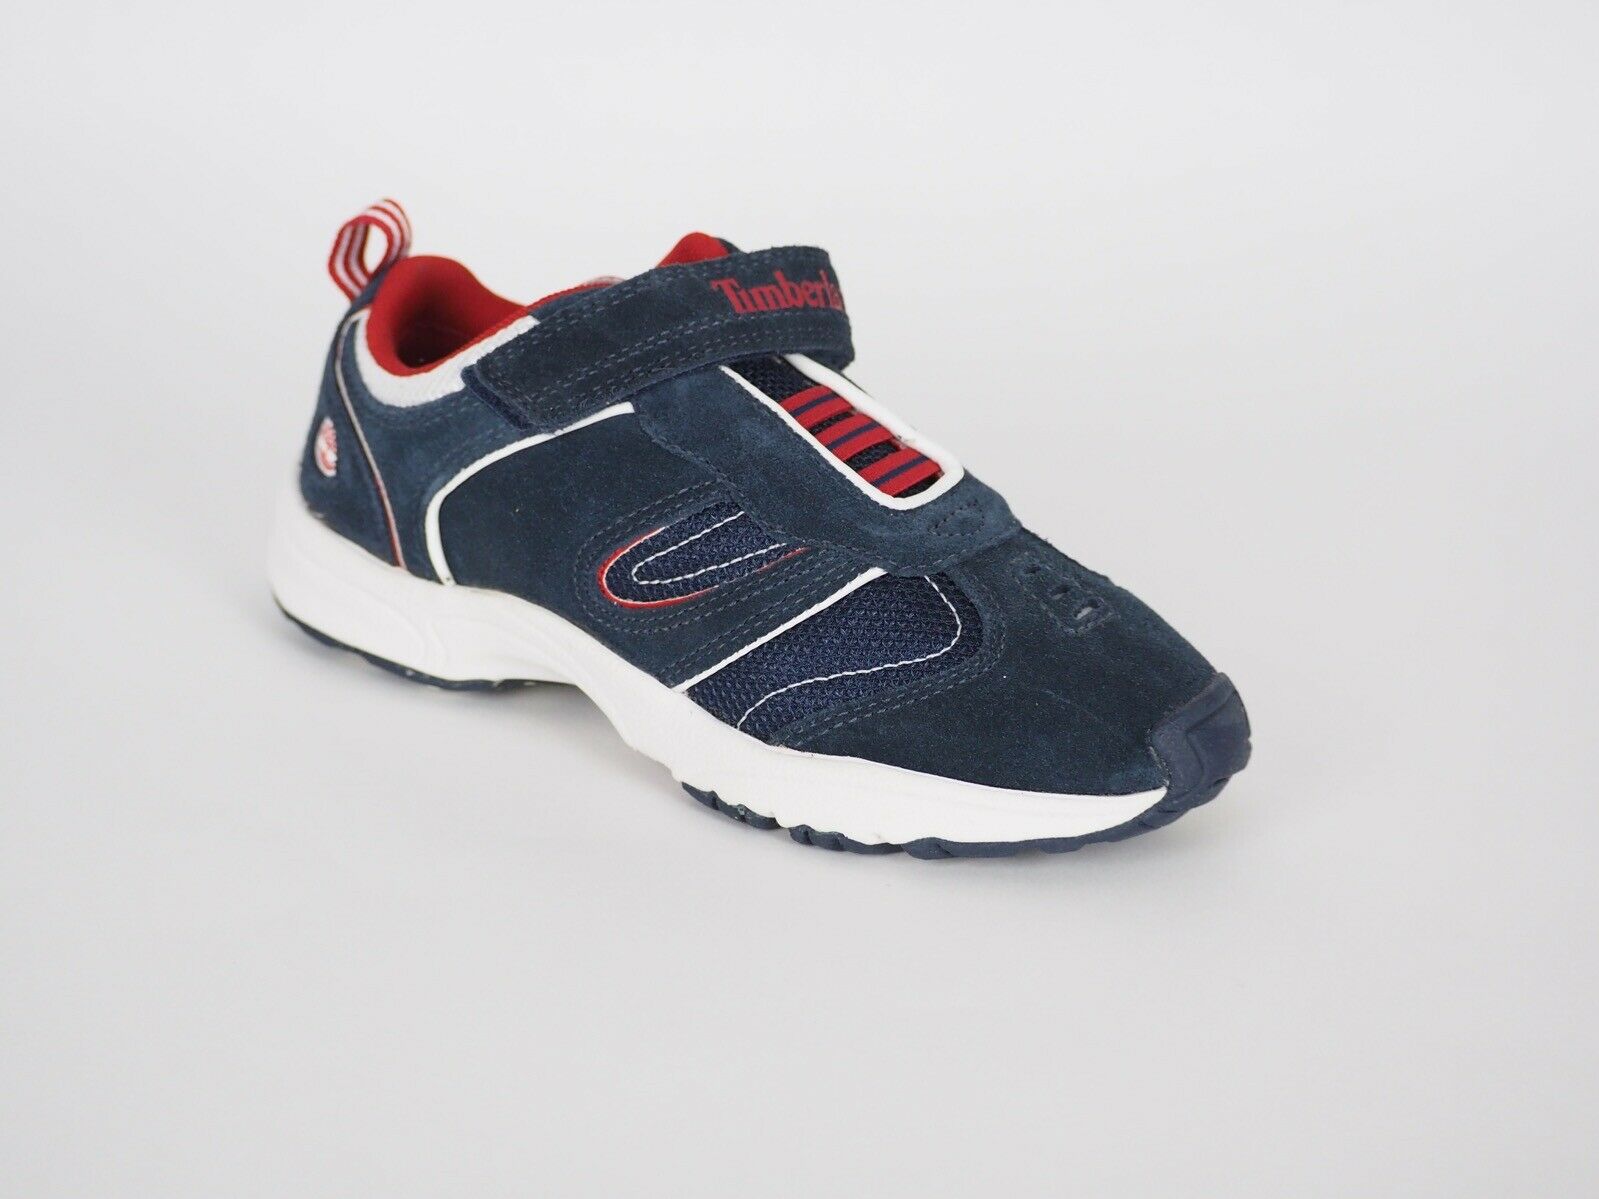 Boys Timberland Trailfinder 51771 Navy Leather Casual Kids Sports Shoes Trainers - London Top Style